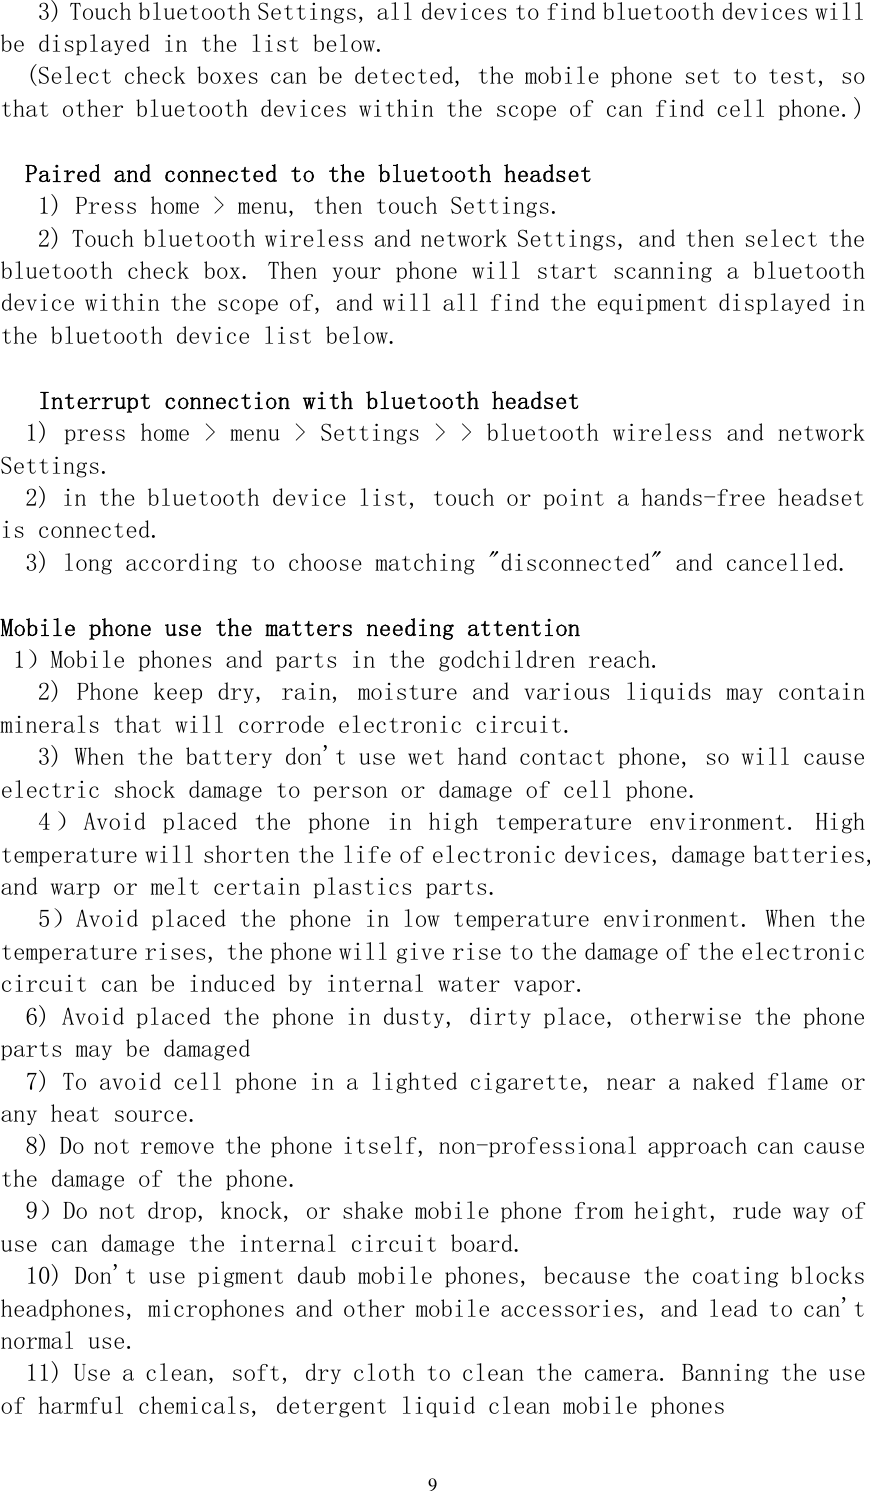  9 3) Touch bluetooth Settings, all devices to find bluetooth devices will be displayed in the list below.  (Select check boxes can be detected, the mobile phone set to test, so that other bluetooth devices within the scope of can find cell phone.)   Paired and connected to the bluetooth headset  1) Press home &gt; menu, then touch Settings.  2) Touch bluetooth wireless and network Settings, and then select the bluetooth check box. Then your phone will start scanning a bluetooth device within the scope of, and will all find the equipment displayed in the bluetooth device list below.   Interrupt connection with bluetooth headset  1) press home &gt; menu &gt; Settings &gt; &gt; bluetooth wireless and network Settings.  2) in the bluetooth device list, touch or point a hands-free headset is connected.  3) long according to choose matching &quot;disconnected&quot; and cancelled.   Mobile phone use the matters needing attention   1）Mobile phones and parts in the godchildren reach.  2) Phone keep dry, rain, moisture and various liquids may contain minerals that will corrode electronic circuit.  3) When the battery don&apos;t use wet hand contact phone, so will cause electric shock damage to person or damage of cell phone.  4 ） Avoid  placed  the  phone  in  high  temperature  environment.  High temperature will shorten the life of electronic devices, damage batteries, and warp or melt certain plastics parts.  5）Avoid placed the phone in low temperature environment. When the temperature rises, the phone will give rise to the damage of the electronic circuit can be induced by internal water vapor.  6) Avoid placed the phone in dusty, dirty place, otherwise the phone parts may be damaged  7) To avoid cell phone in a lighted cigarette, near a naked flame or any heat source.  8) Do not remove the phone itself, non-professional approach can cause the damage of the phone.  9）Do not drop, knock, or shake mobile phone from height, rude way of use can damage the internal circuit board.  10) Don&apos;t use pigment daub mobile phones, because the coating blocks headphones, microphones and other mobile accessories, and lead to can&apos;t normal use.  11) Use a clean, soft, dry cloth to clean the camera. Banning the use of harmful chemicals, detergent liquid clean mobile phones  